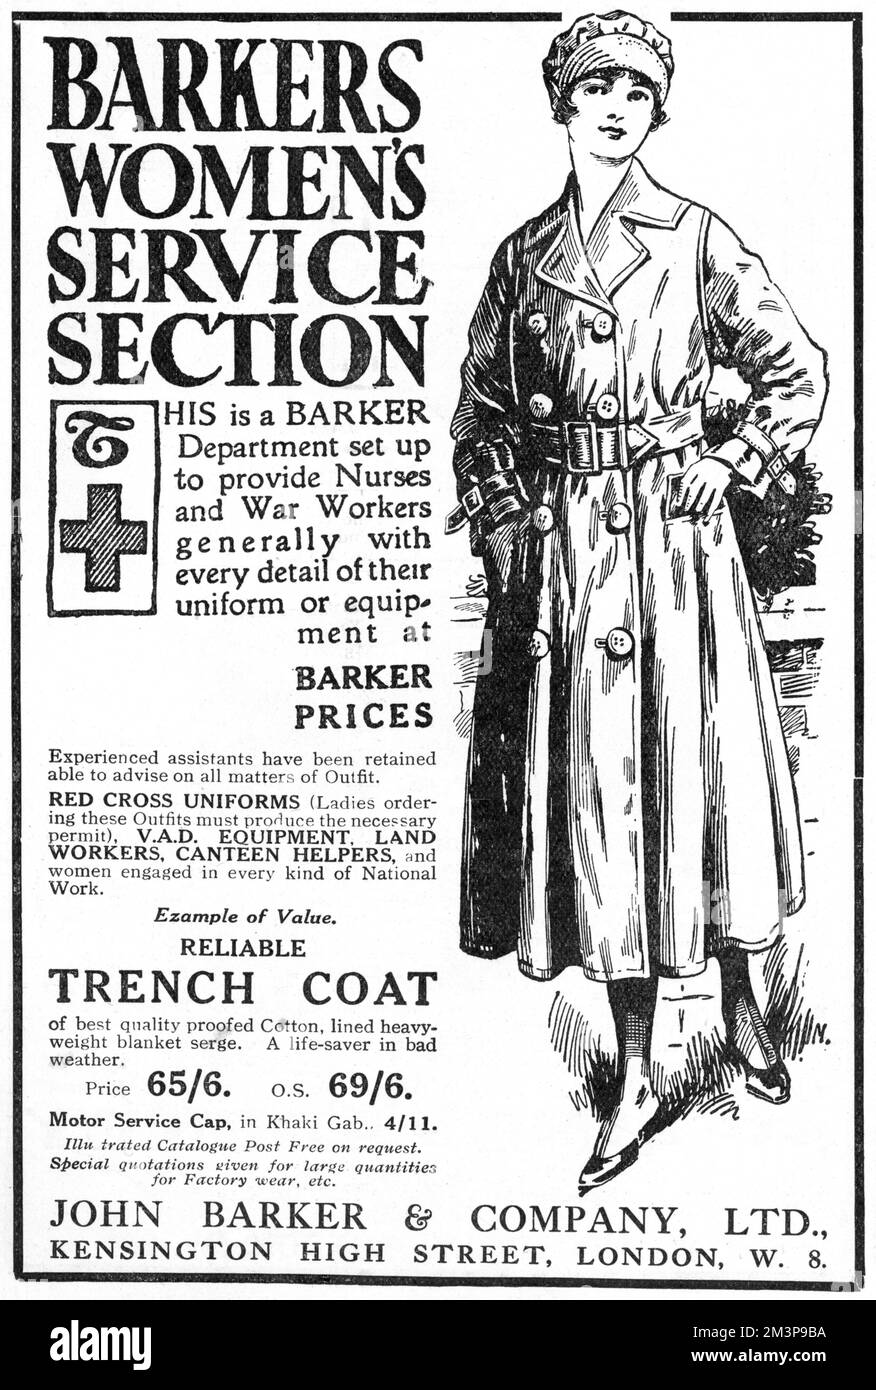 Advertisement for the Women's Service Section of Barker's Department Store on Kensington High Street, set up to provide nurses and war workers generally with every detail of their uniform or equipment including this reliable trench coat made of best quality proofed cotton, lined with heavyweight blanket serge, 'a life saver in bad weather.'     Date: 1917 Stock Photo